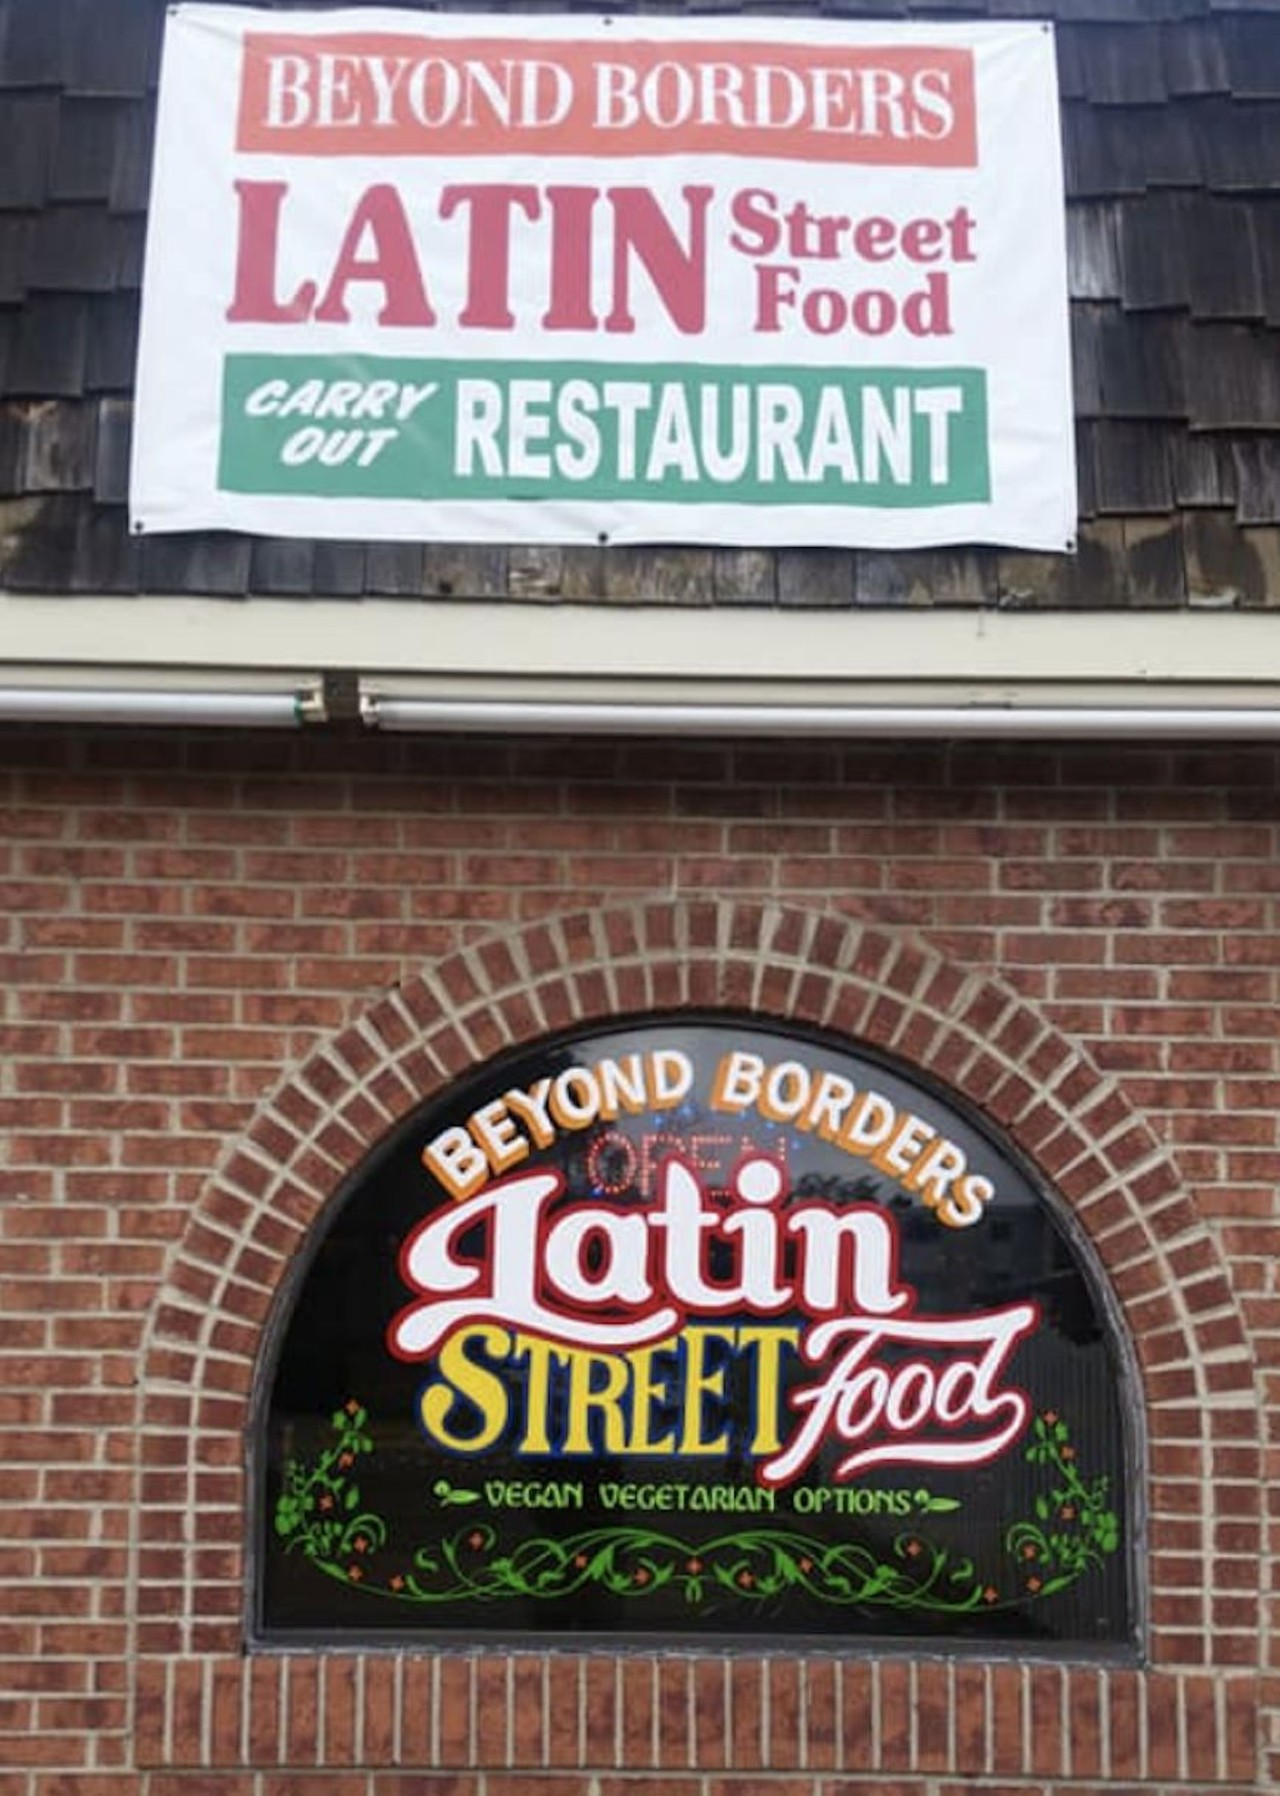 23. Beyond Borders
810 S. Main St., Plymouth; 734-259-8415; beyondbordersplymouth.com
&#147;Just ordered from here this morning it was sooo good I can't believe I didn't find this place sooner!!! I'm pissed I've even been wasting my time eating at other Mexican places. I got a vegan burrito and it had so many fresh vegetables in it and the ratio of beans, rice, veggies and other condiments was perfection. My husband loved his quesadilla too. Next meal we've had since the pandemic  happened!! We will be back often!!&#148; &#151; Mira M. on Yelp
Photo via Beyond Borders/Facebook